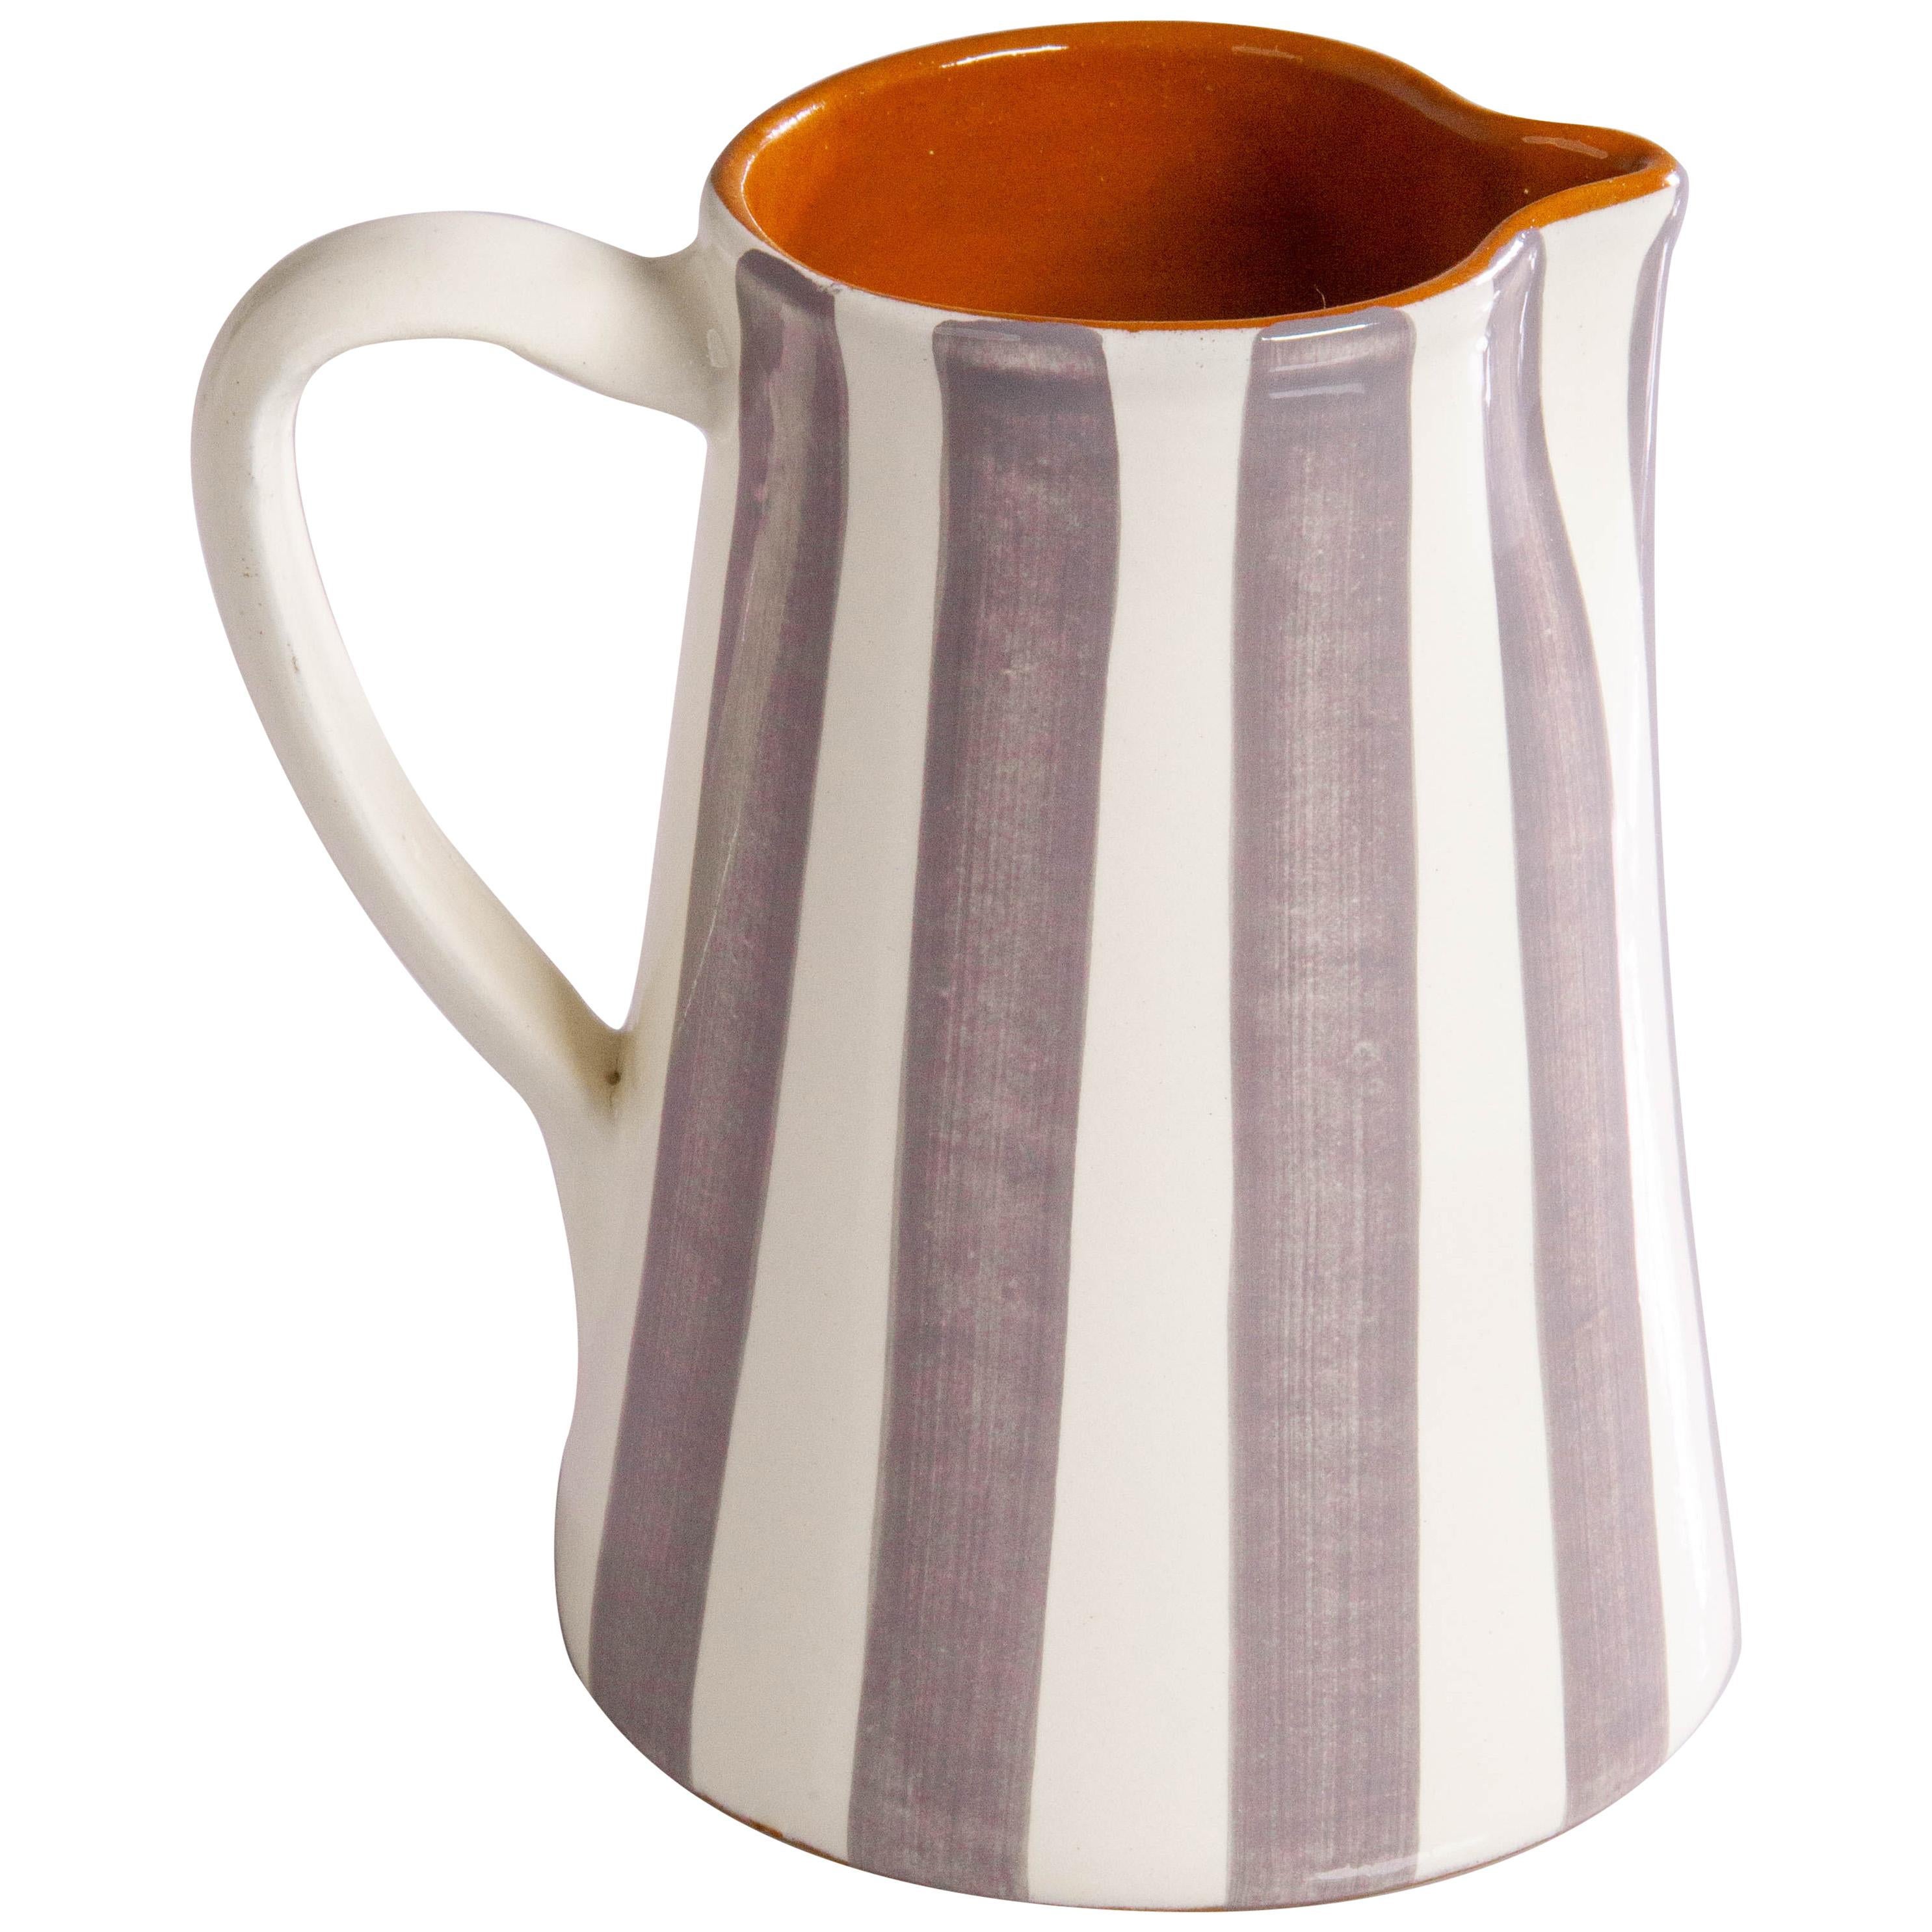 Handmade Ceramic Striped Jug with Graphic Gray and White Design, in Stock